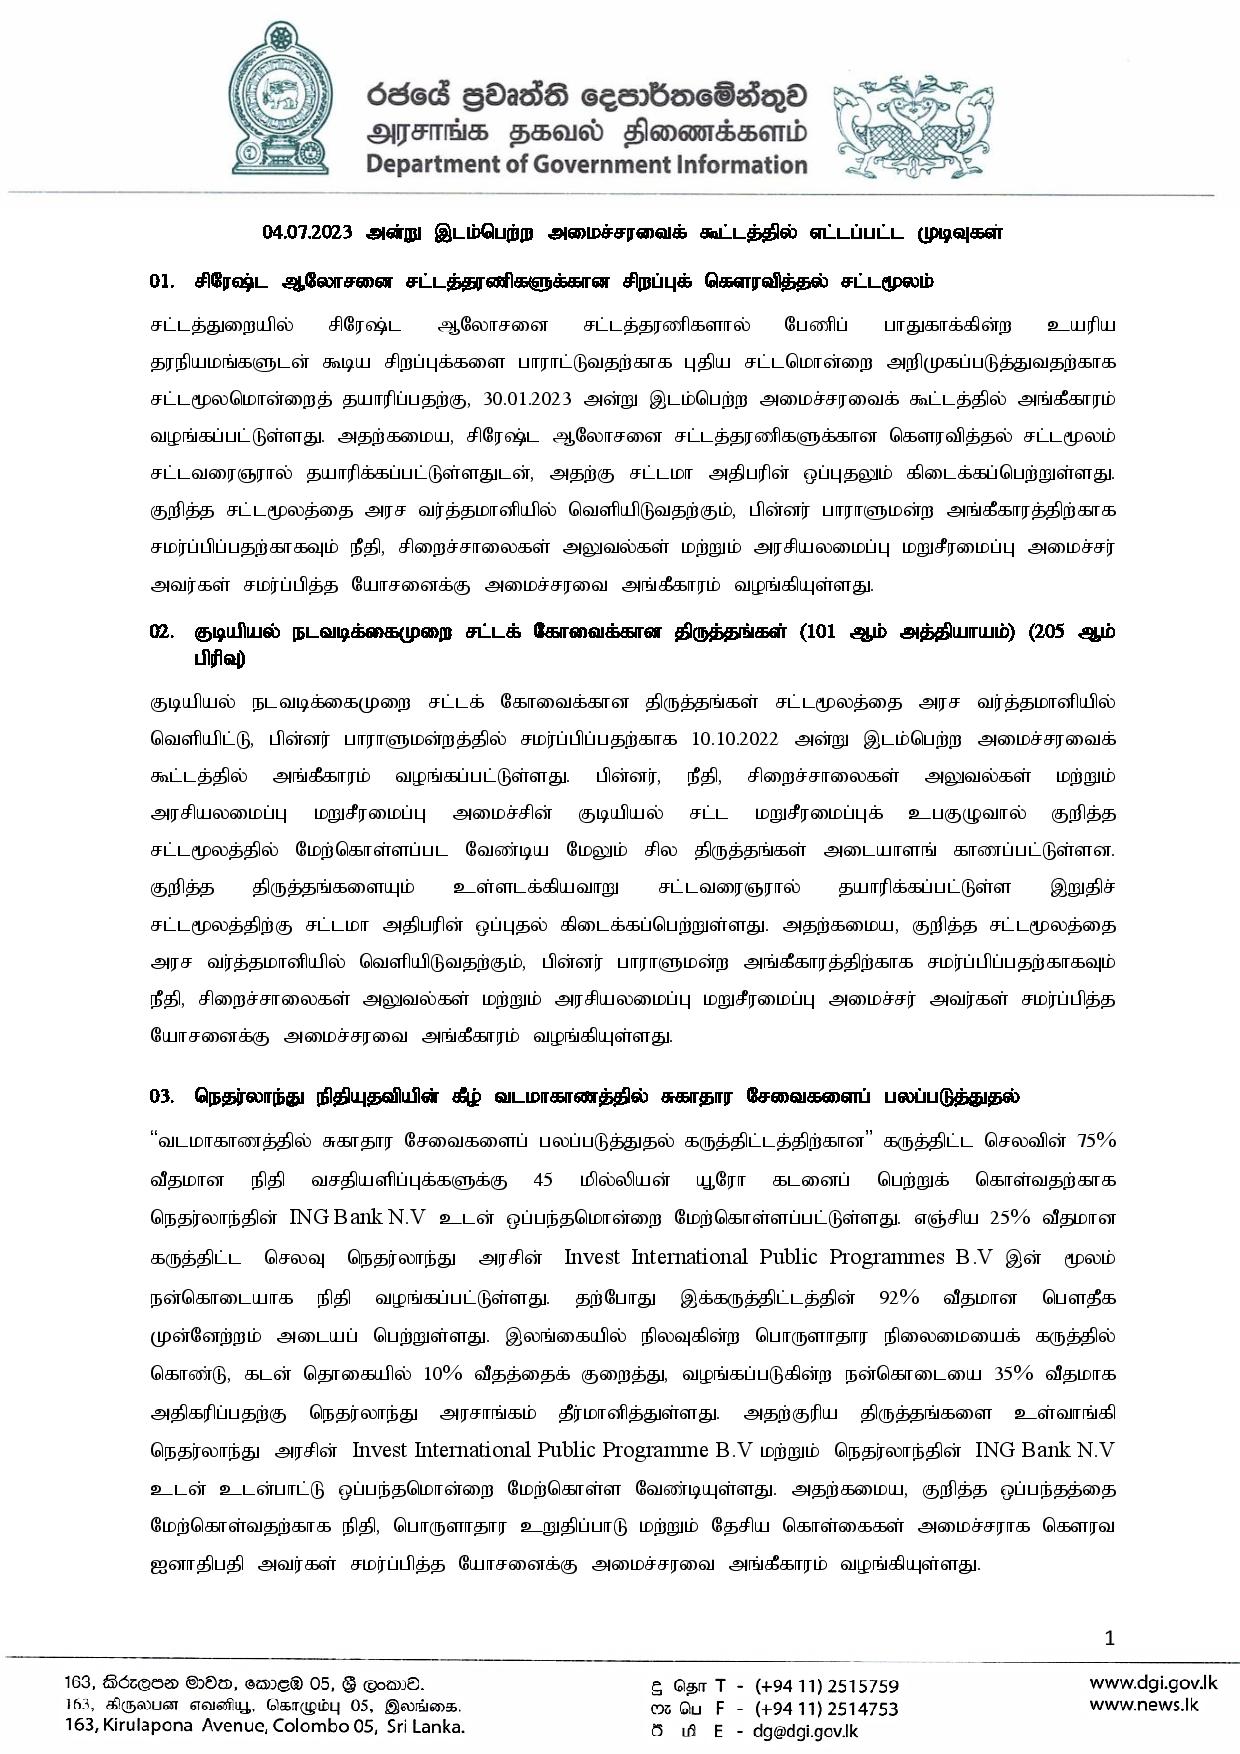 Cabinet Decisions on 04.07.2023 Tamil page 001